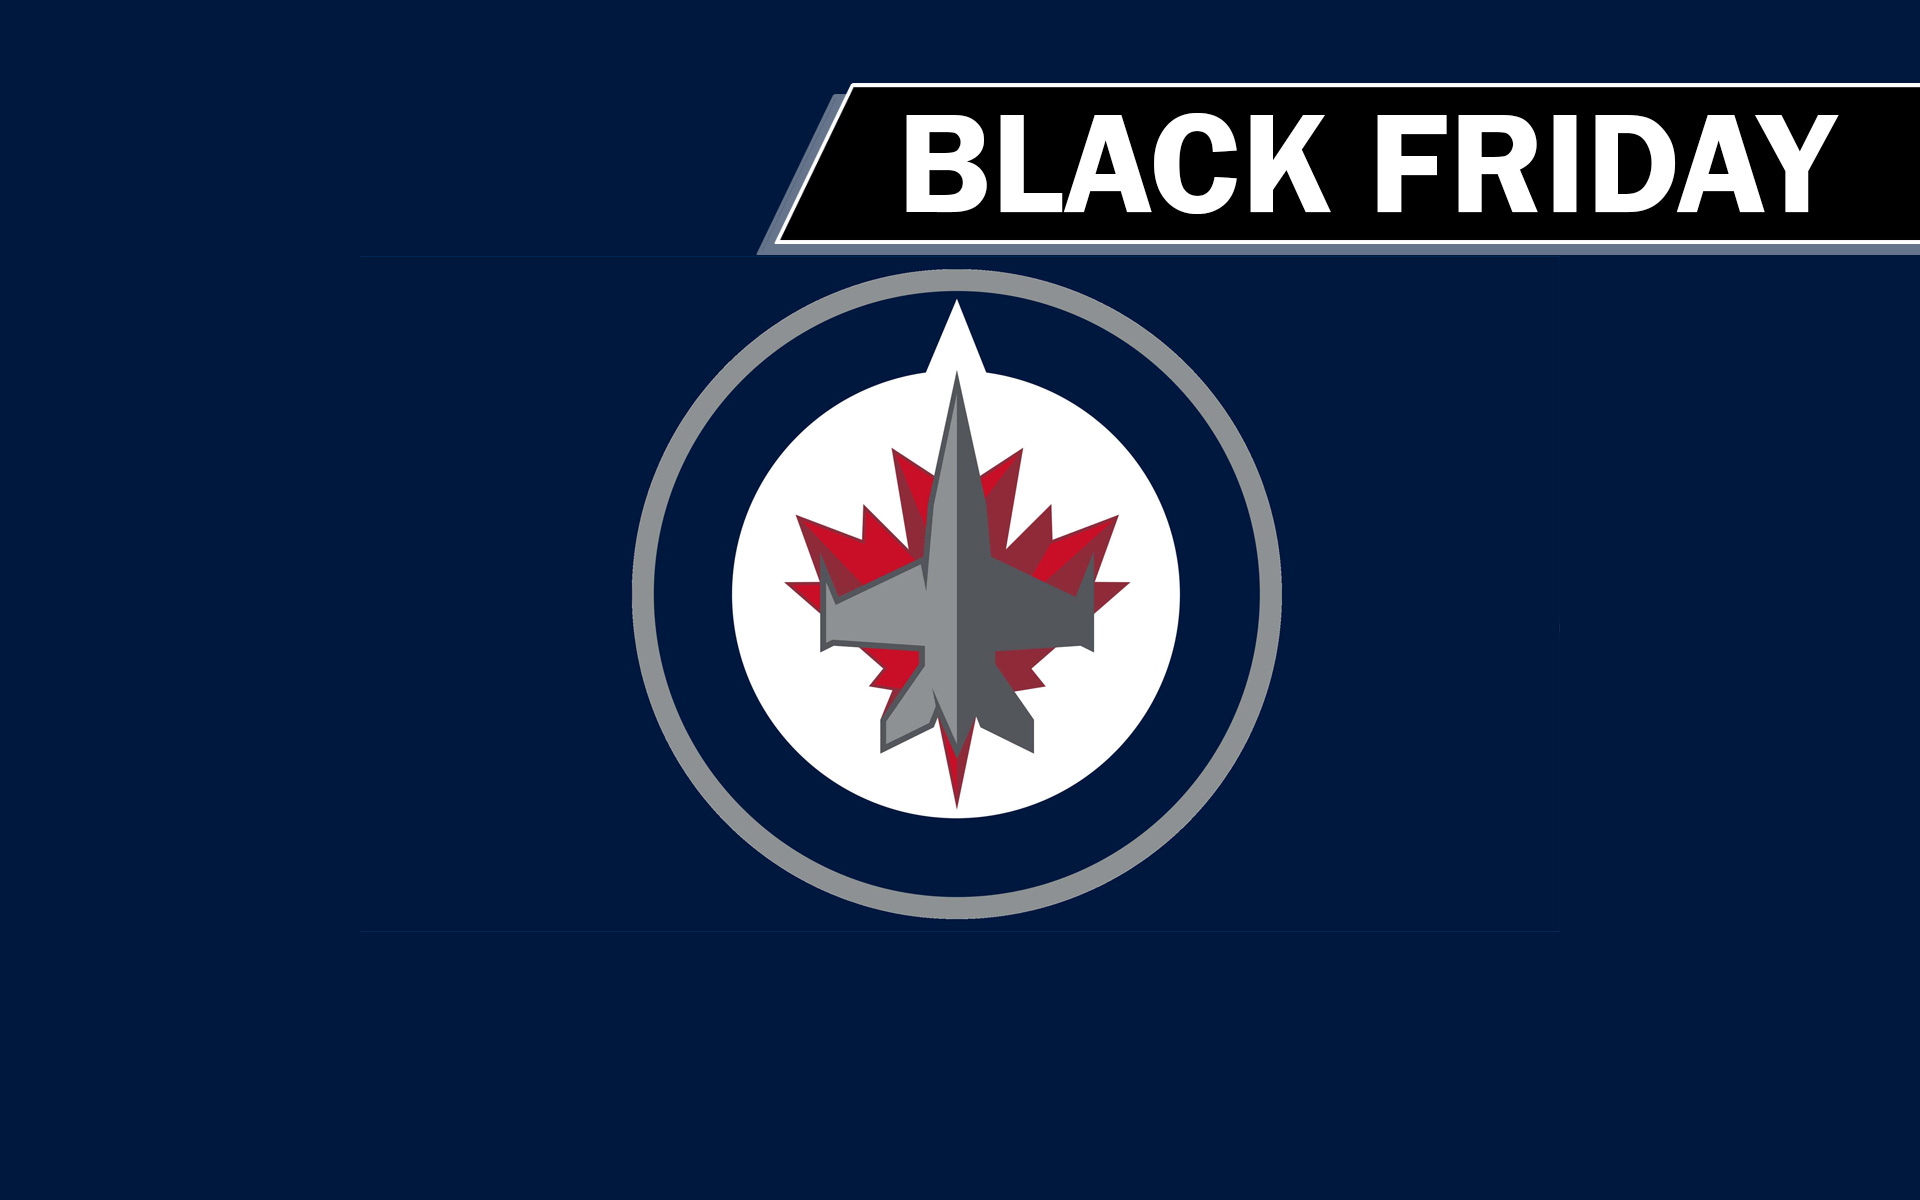 Winnipeg Jets on X: Our Black Friday Sale is LIVE Save BIG all week  with Black Friday deals on #NHLJets gear! Hundreds of items 25 - 75% off!  Visit True North Shop